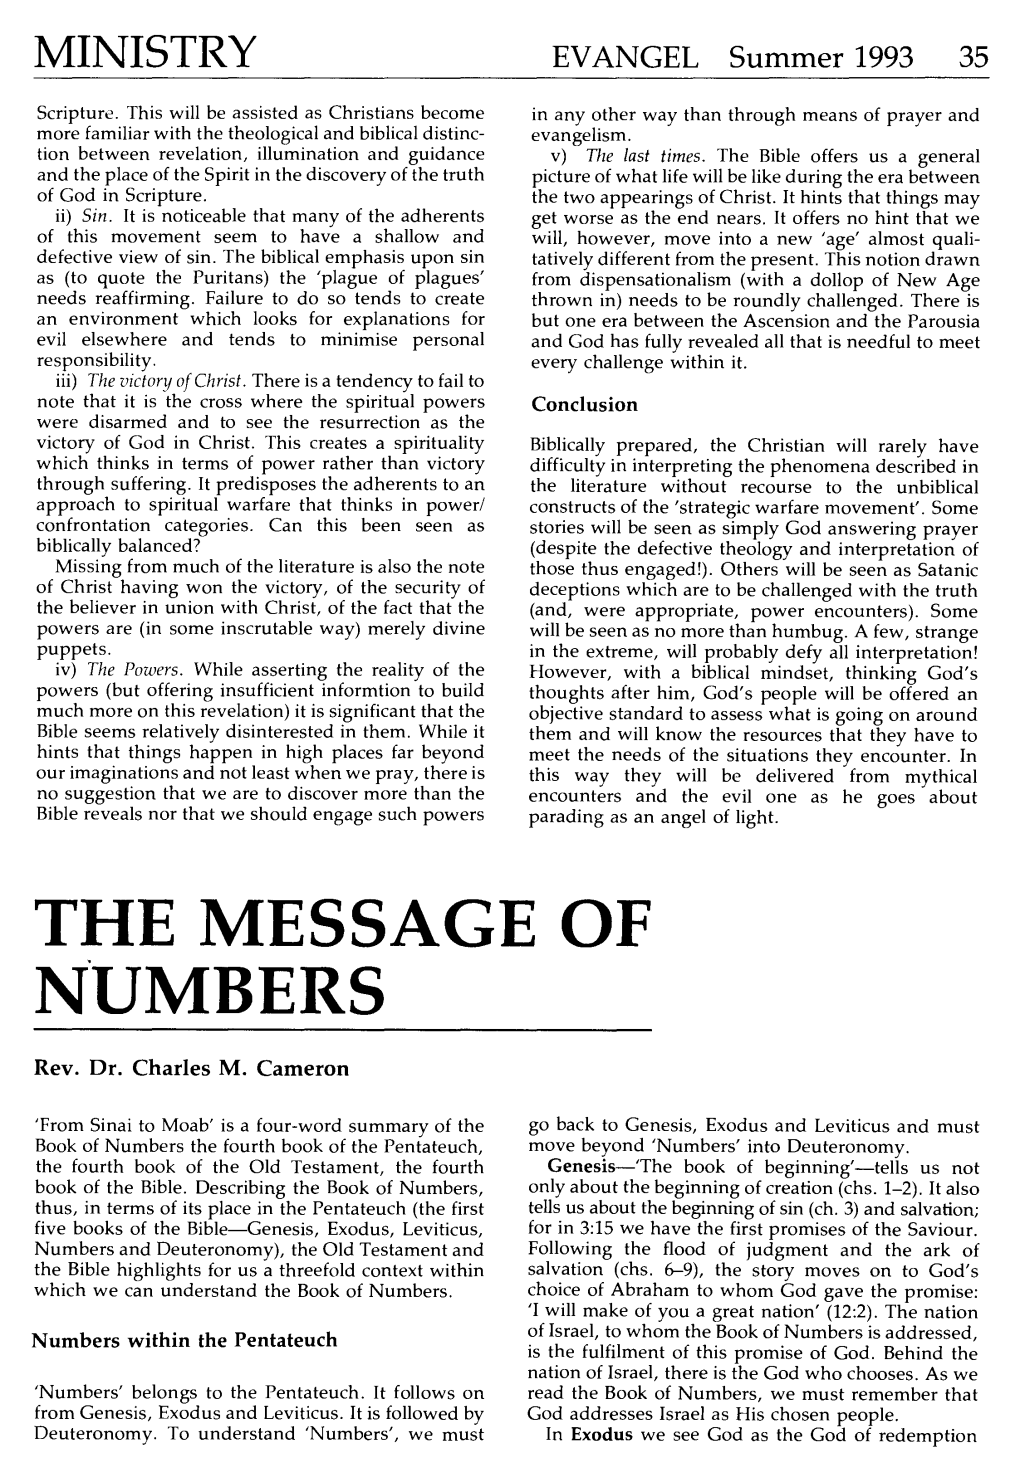 "The Message of Numbers," Evangel 11:2 (1993): 35-39